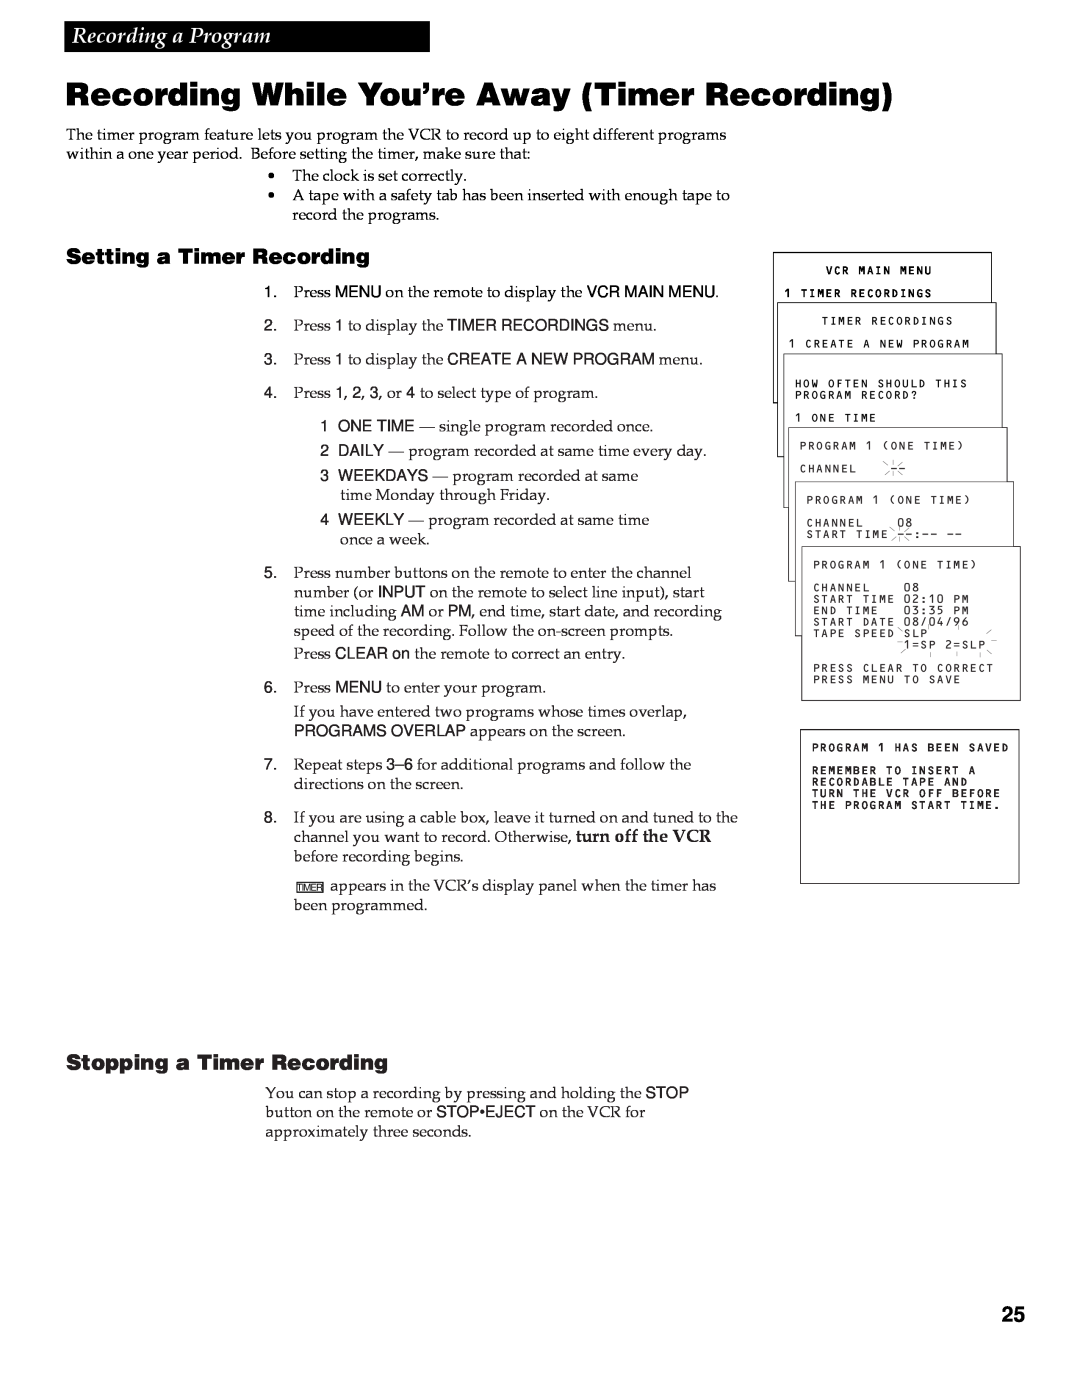 RCA VR642HF manual Recording While You’re Away Timer Recording, Setting a Timer Recording, Stopping a Timer Recording 